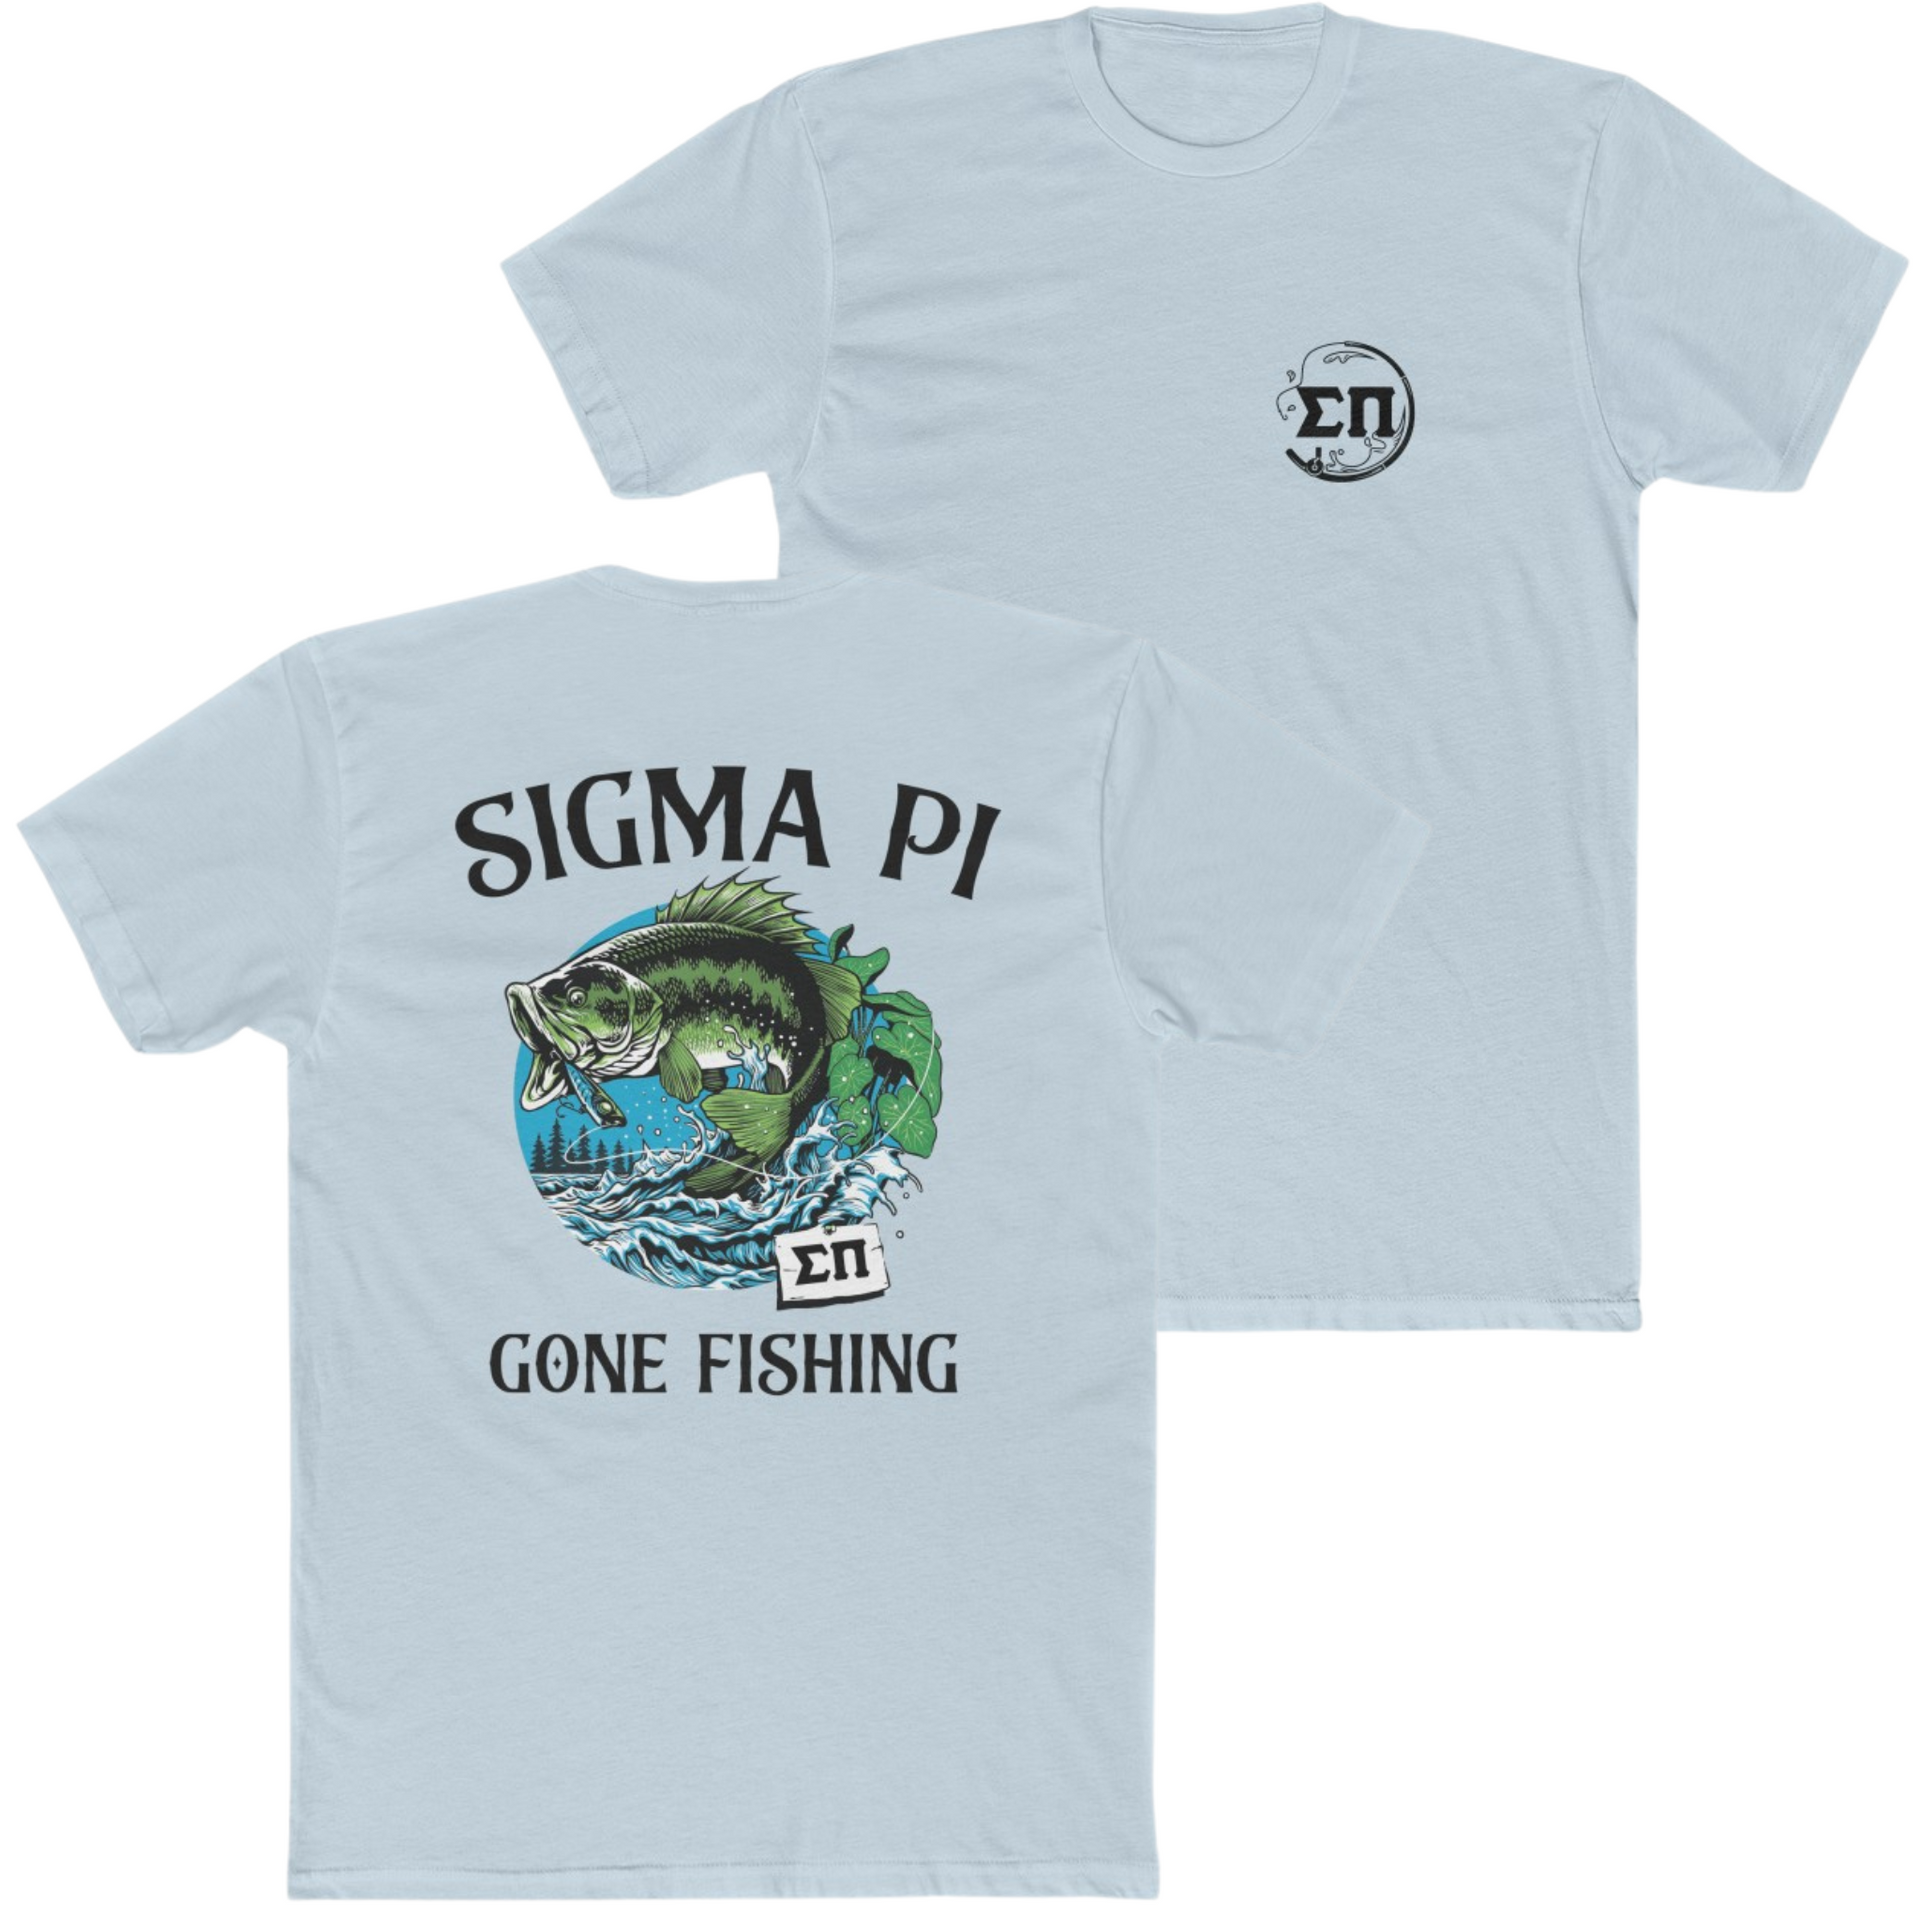 Light Blue Sigma Pi Graphic T-Shirt | Gone Fishing | Sigma Pi Apparel and Merchandise 